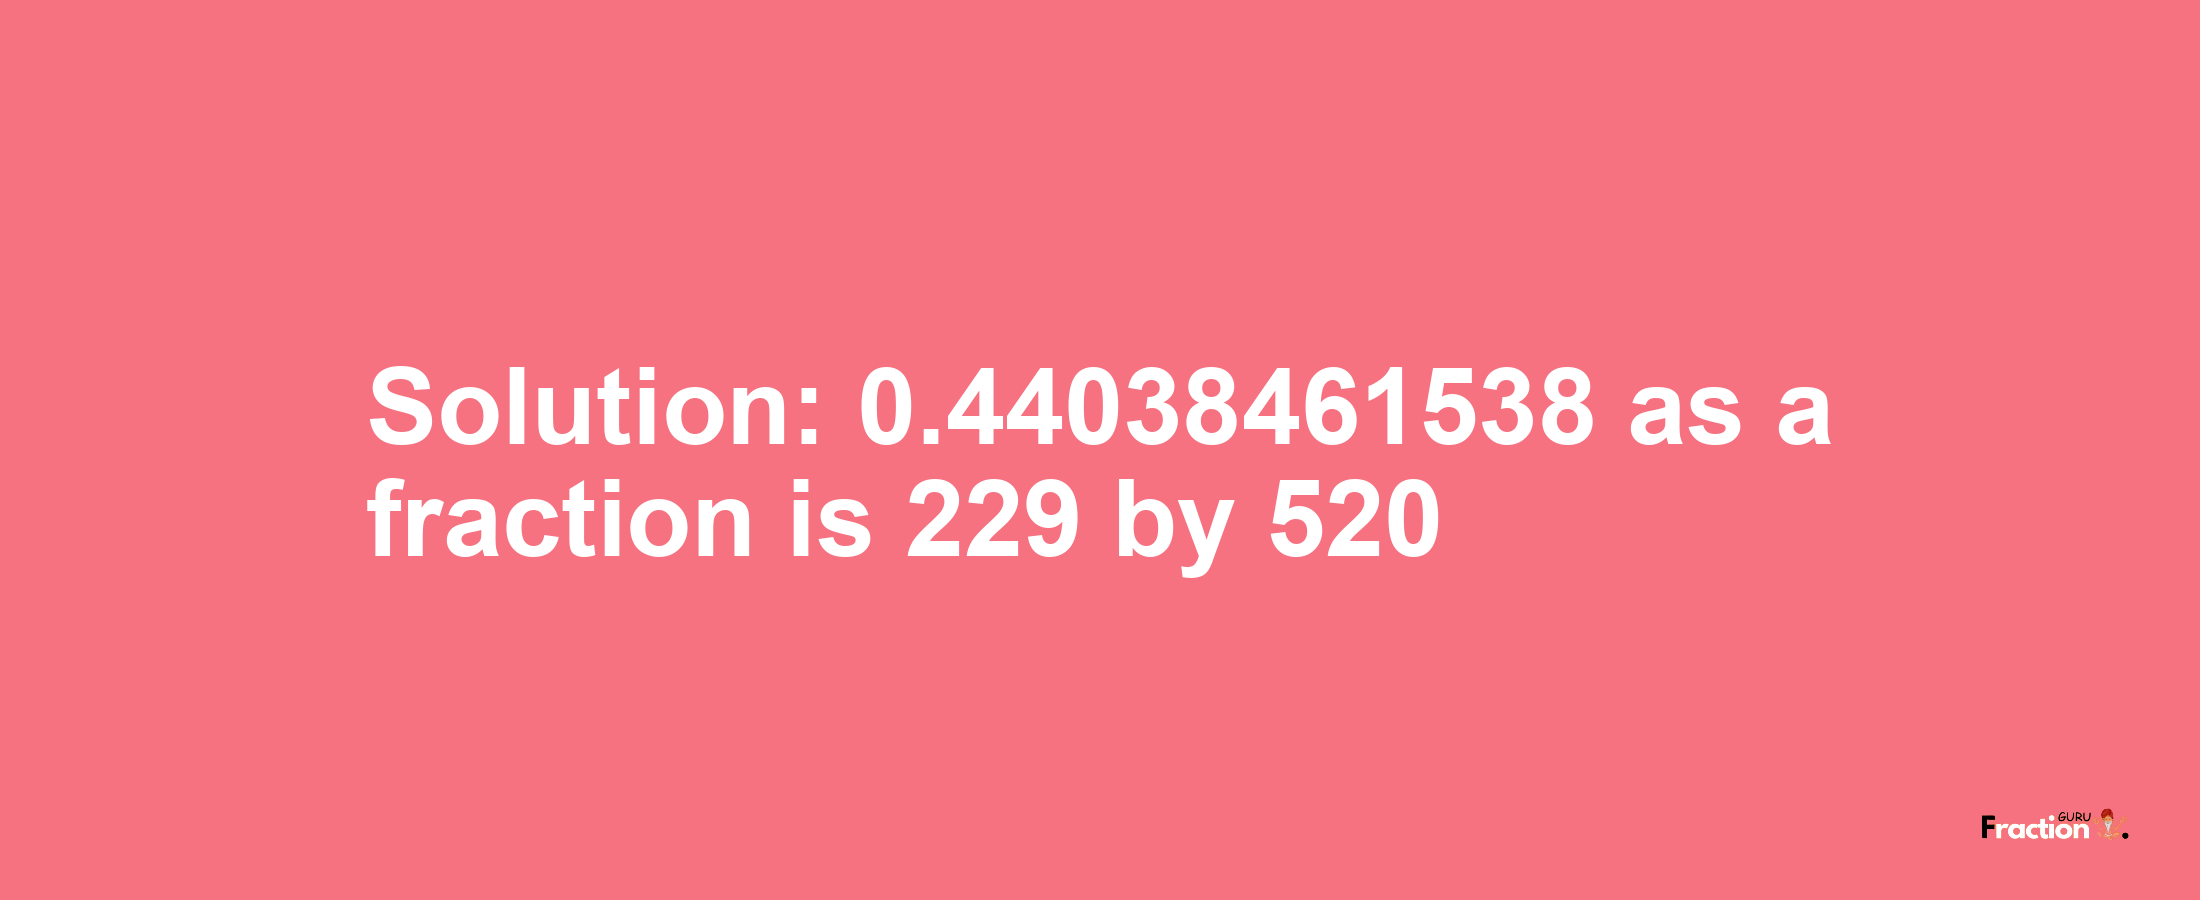 Solution:0.44038461538 as a fraction is 229/520